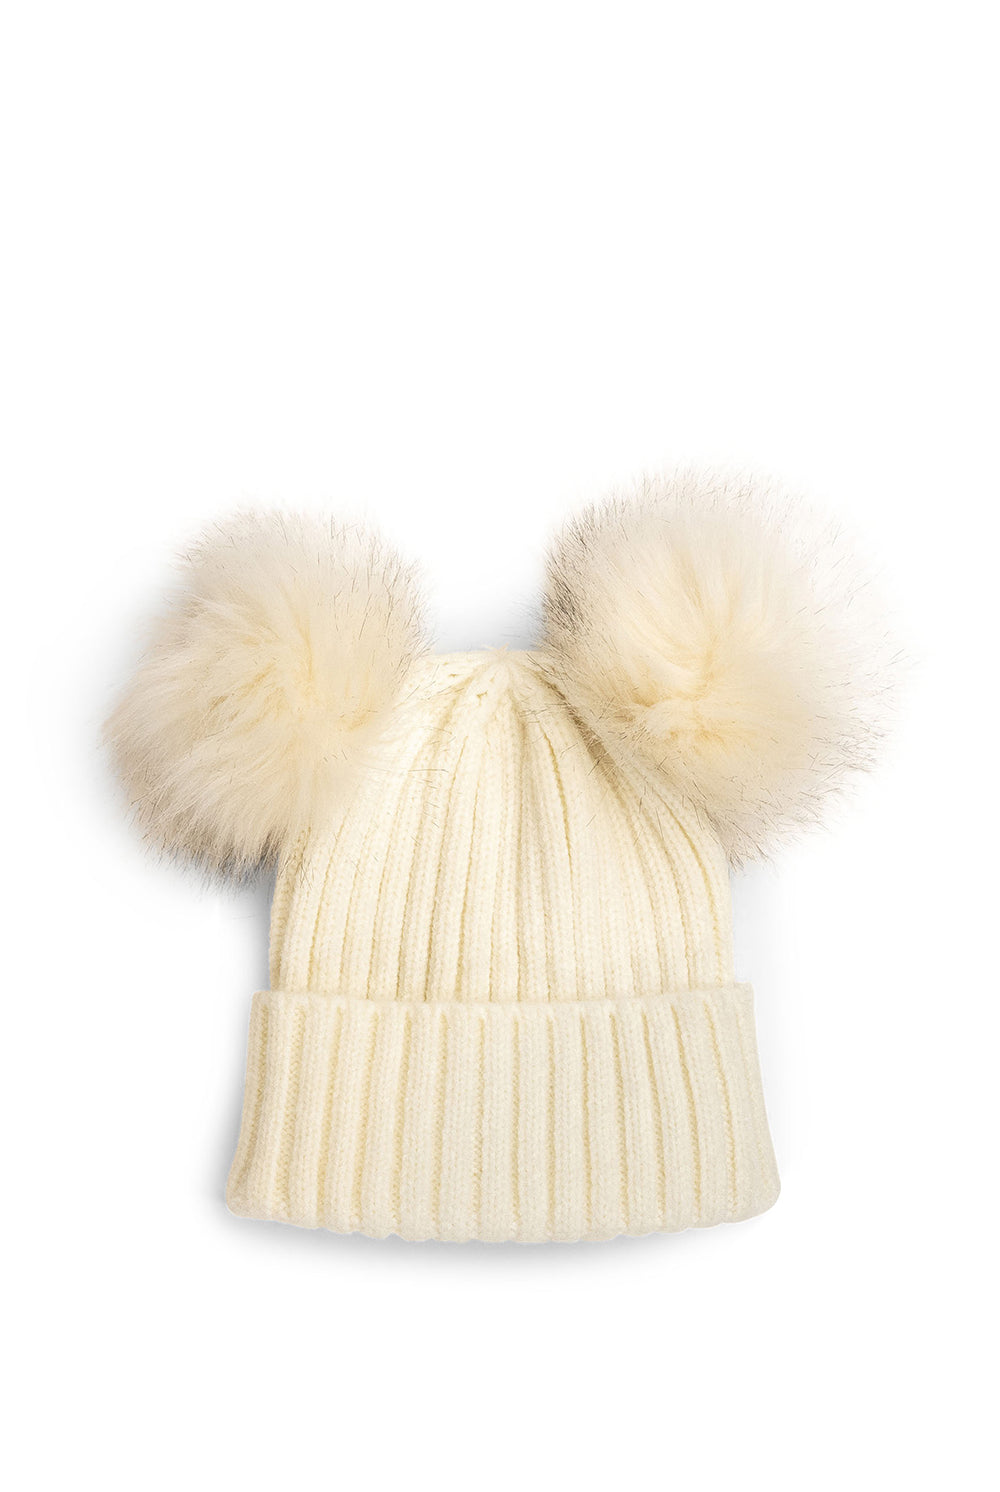 My Accessories London Knitted Double Fur Pom Beanie in White | Hat | Pom Pom | Women's Accessories | Autumn | Winter | Basics